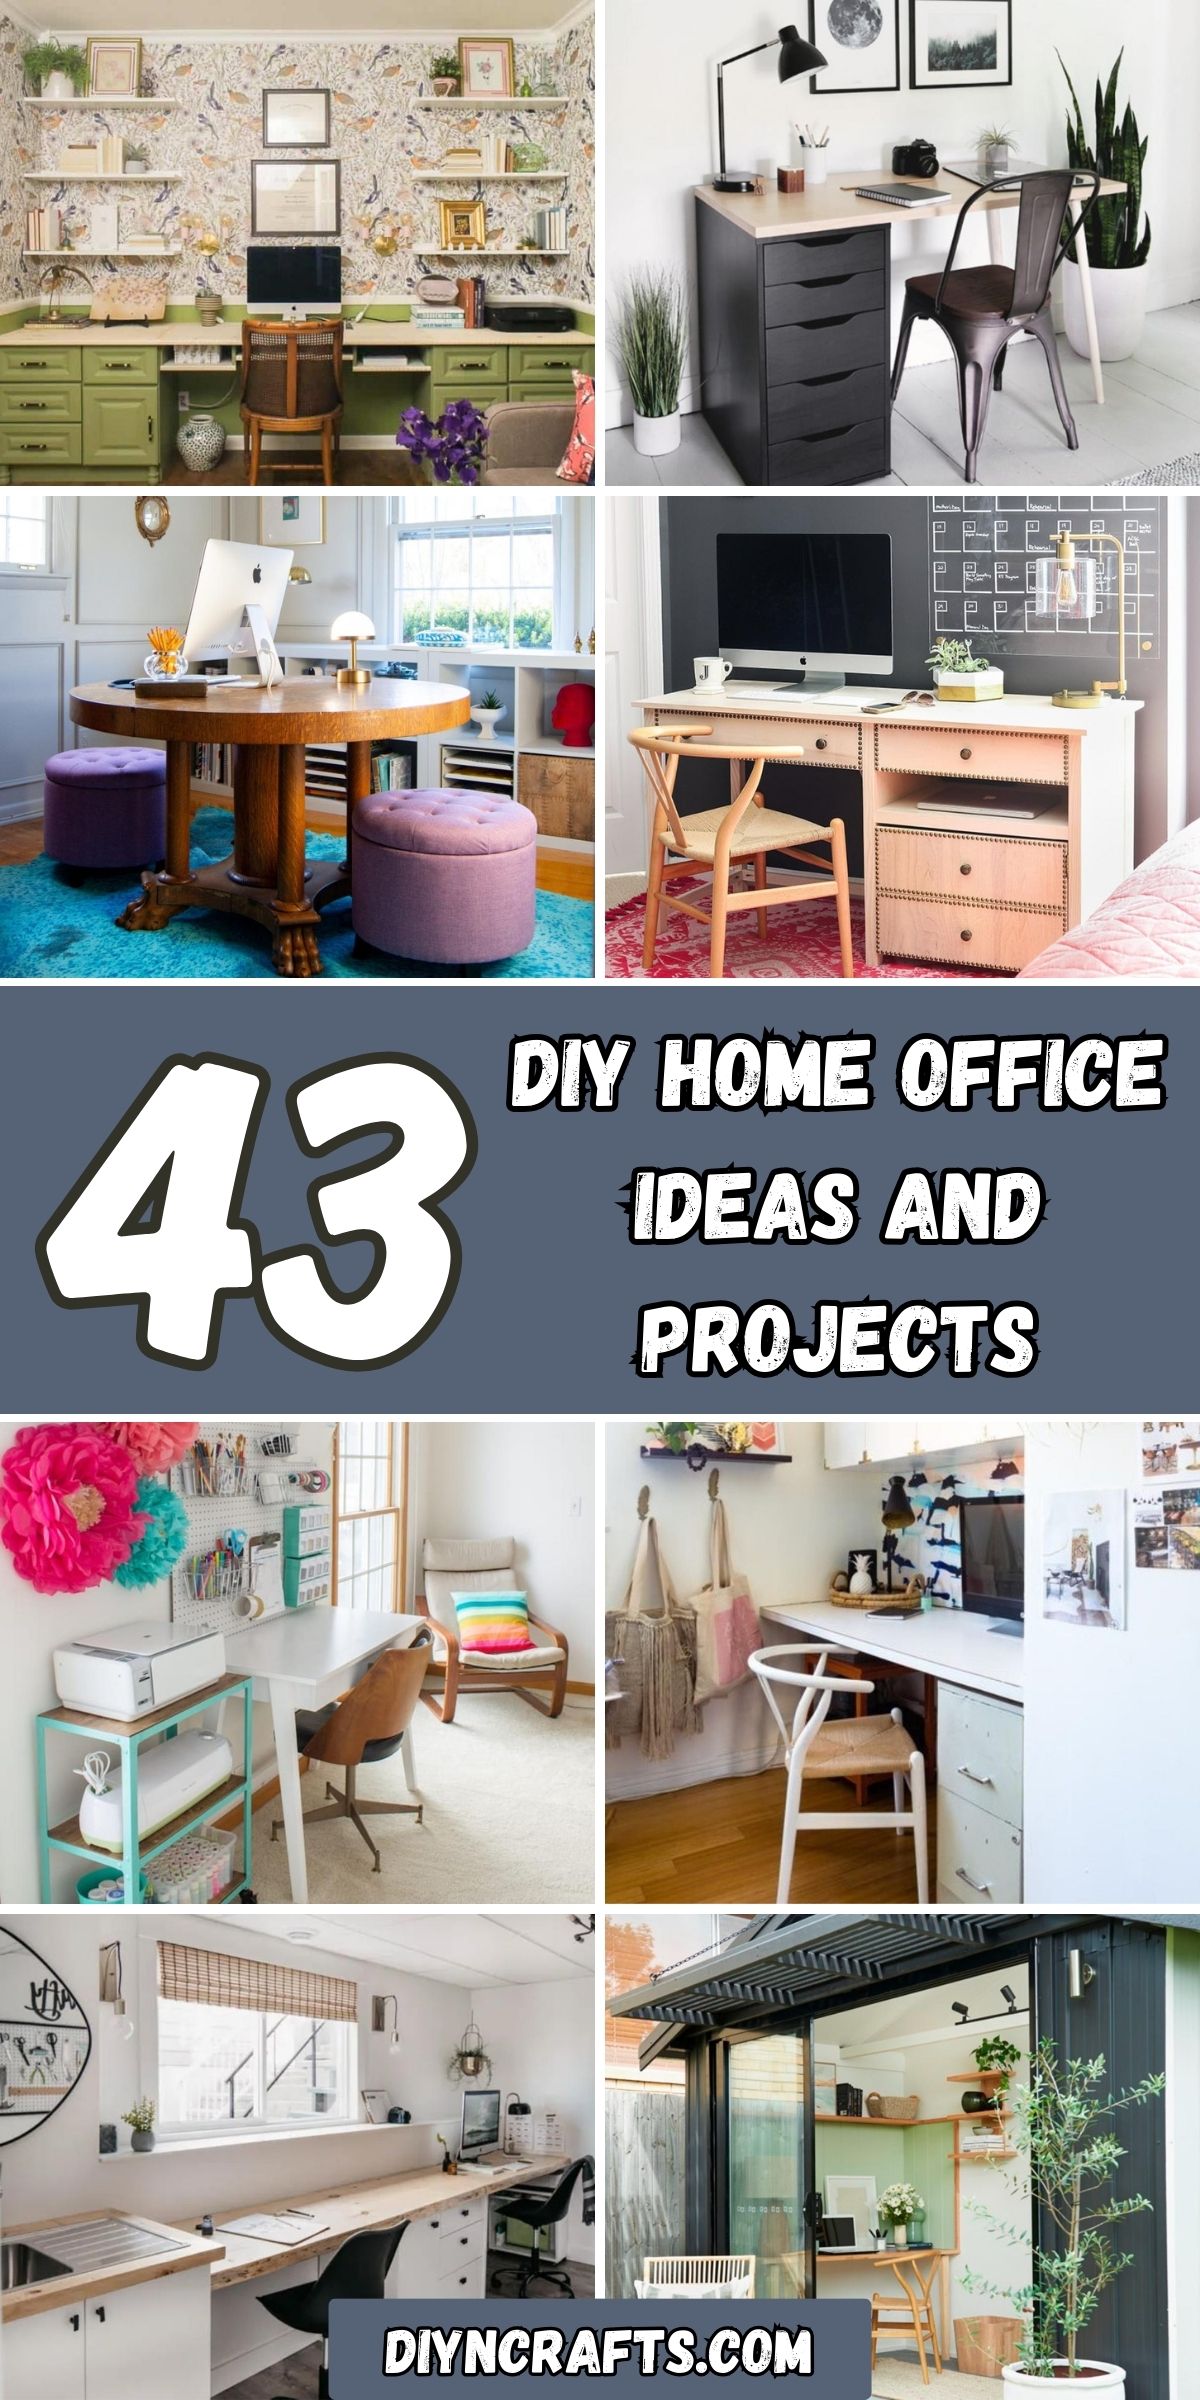 43 DIY Home Office Ideas and Projects collage.